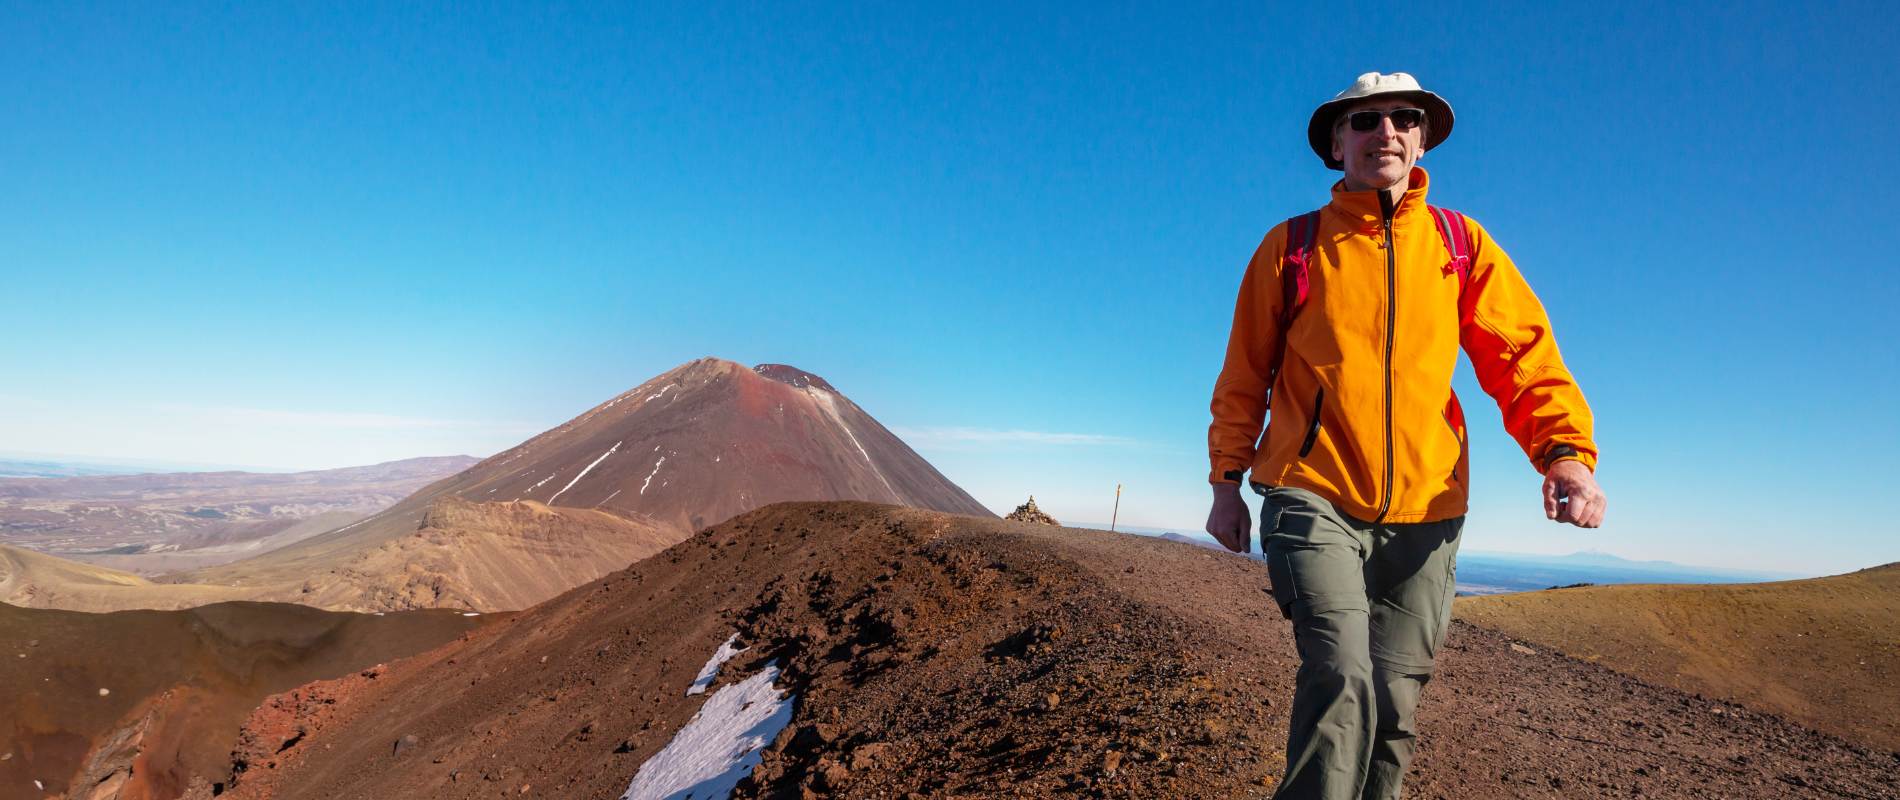 A Day of Adventure Conquering The Tongariro Crossing